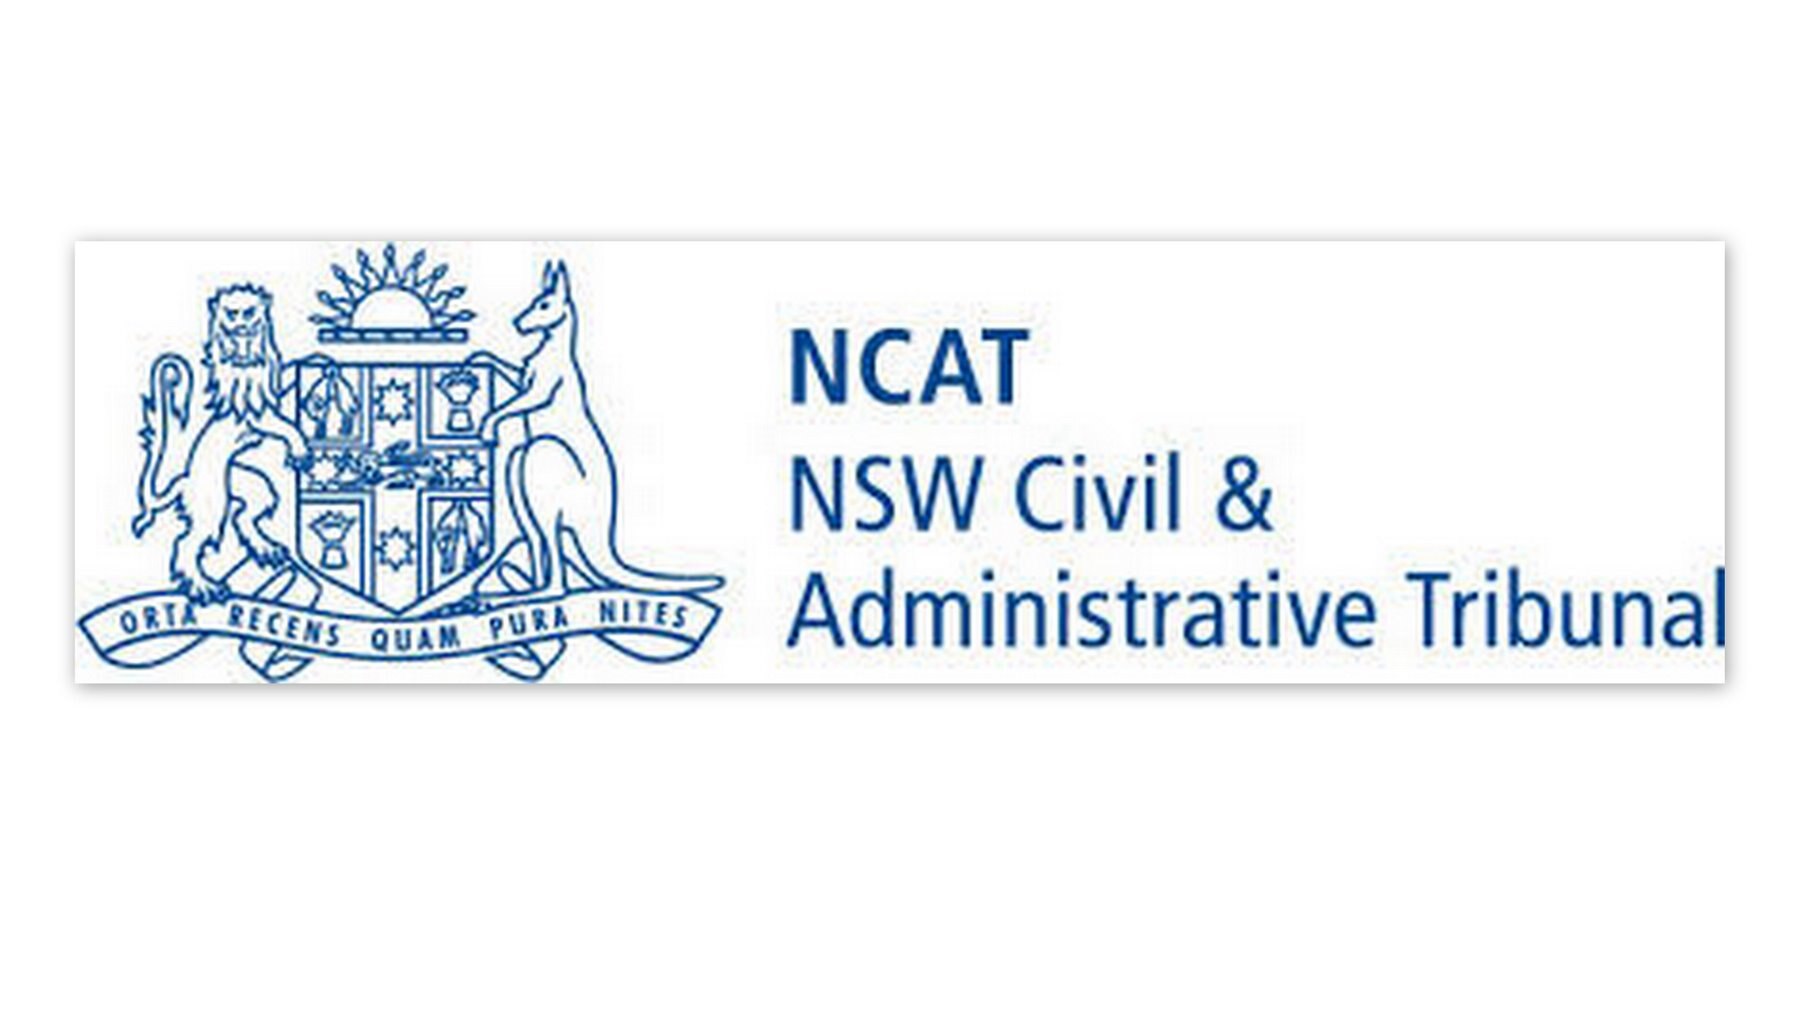 The New South Wales Civil and Administrative Tribunal